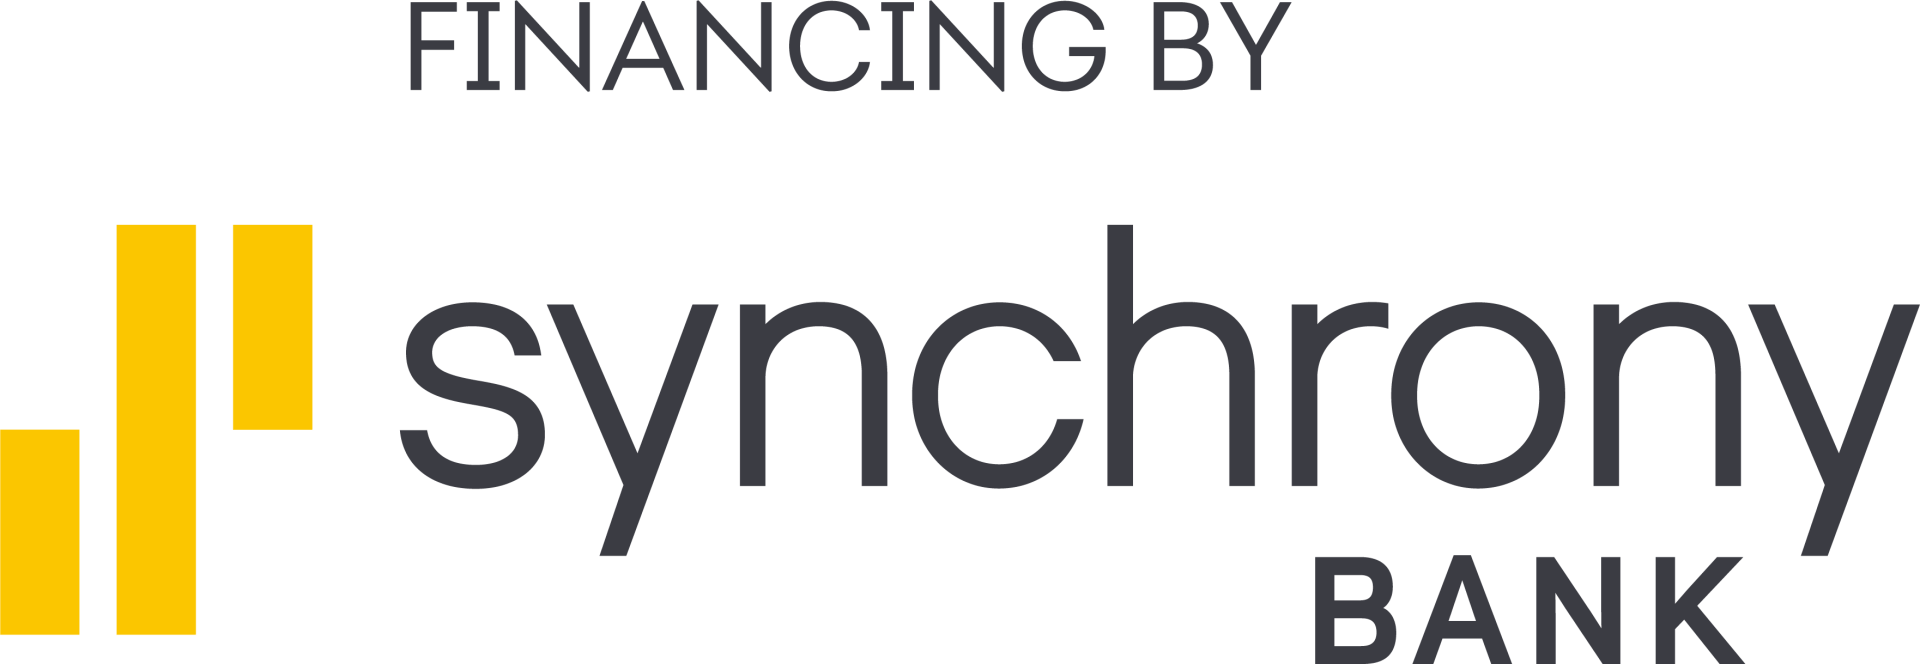 financing by synchrony bank